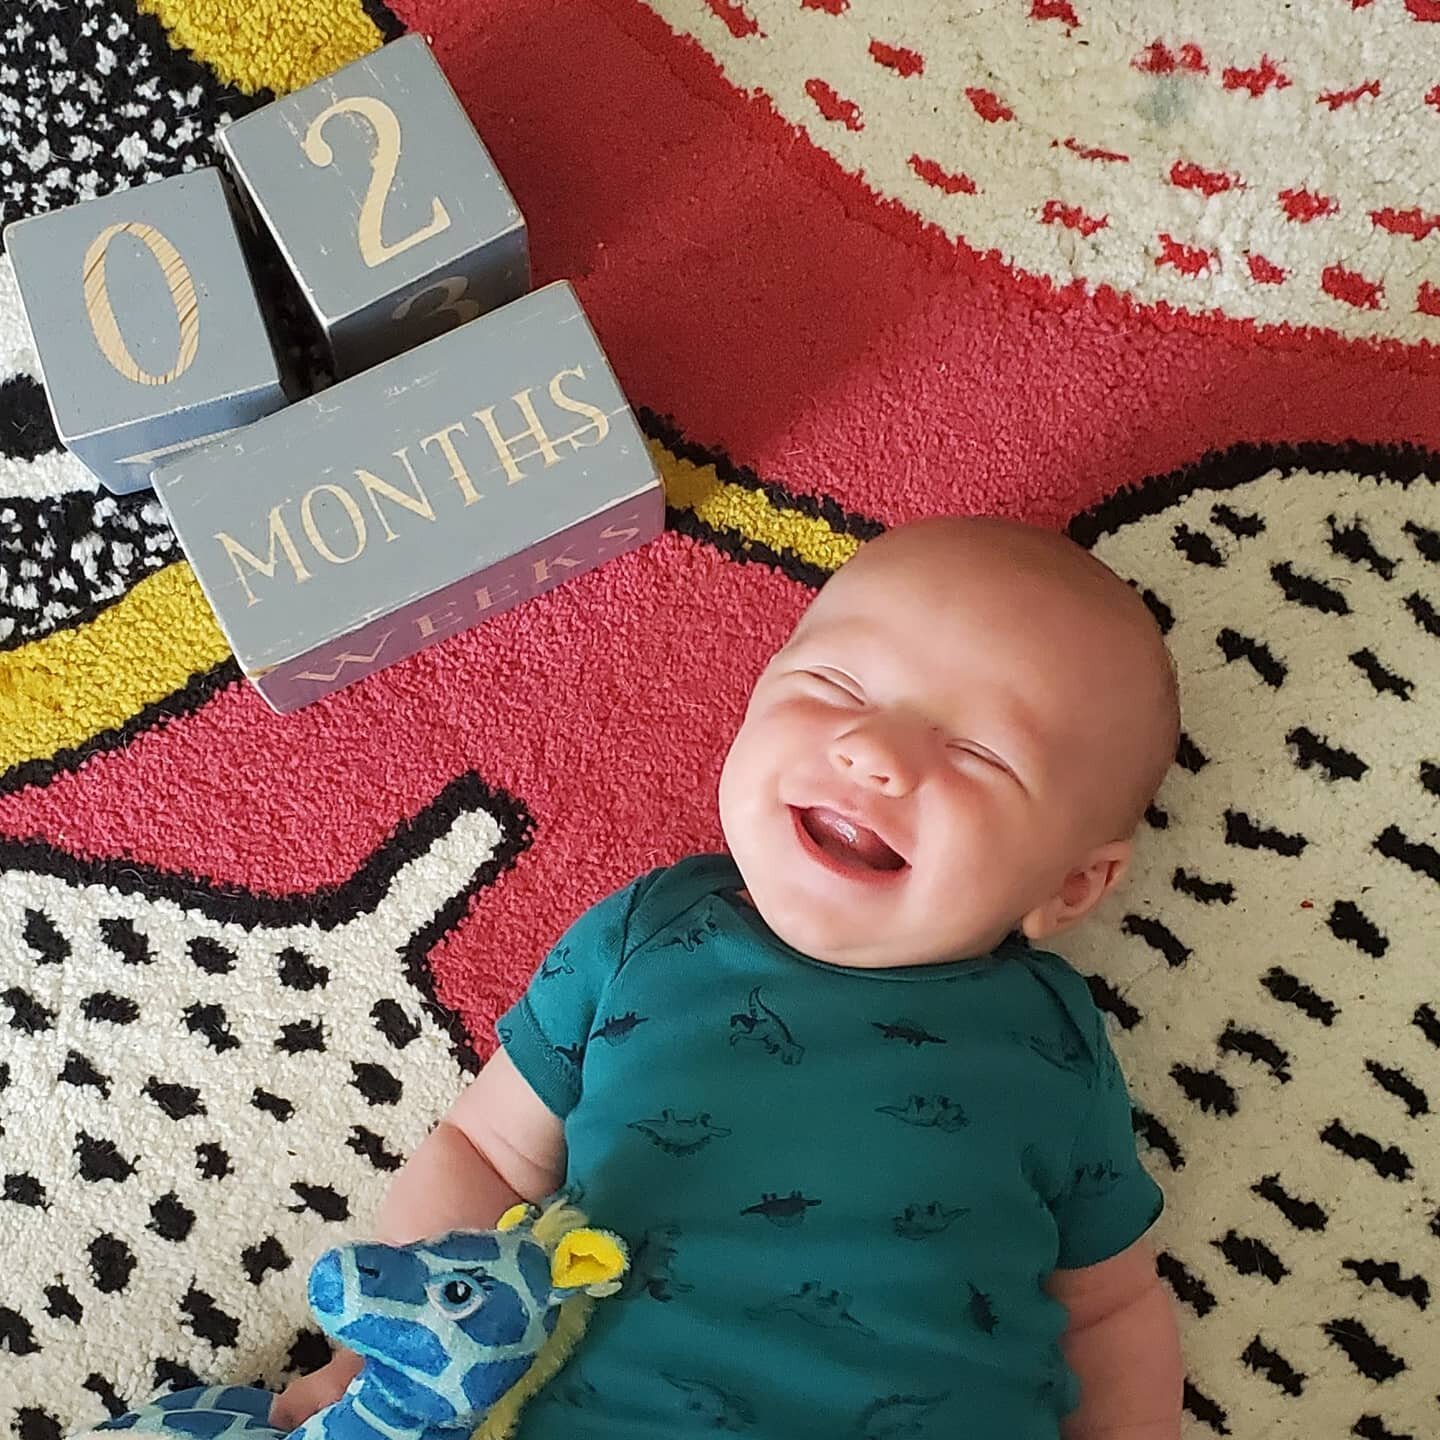 This chubby chunker is 2 months old today! Weighing in at 15+ lbs!! #2monthsold #twomonthsold #chubbybaby #chunkybaby